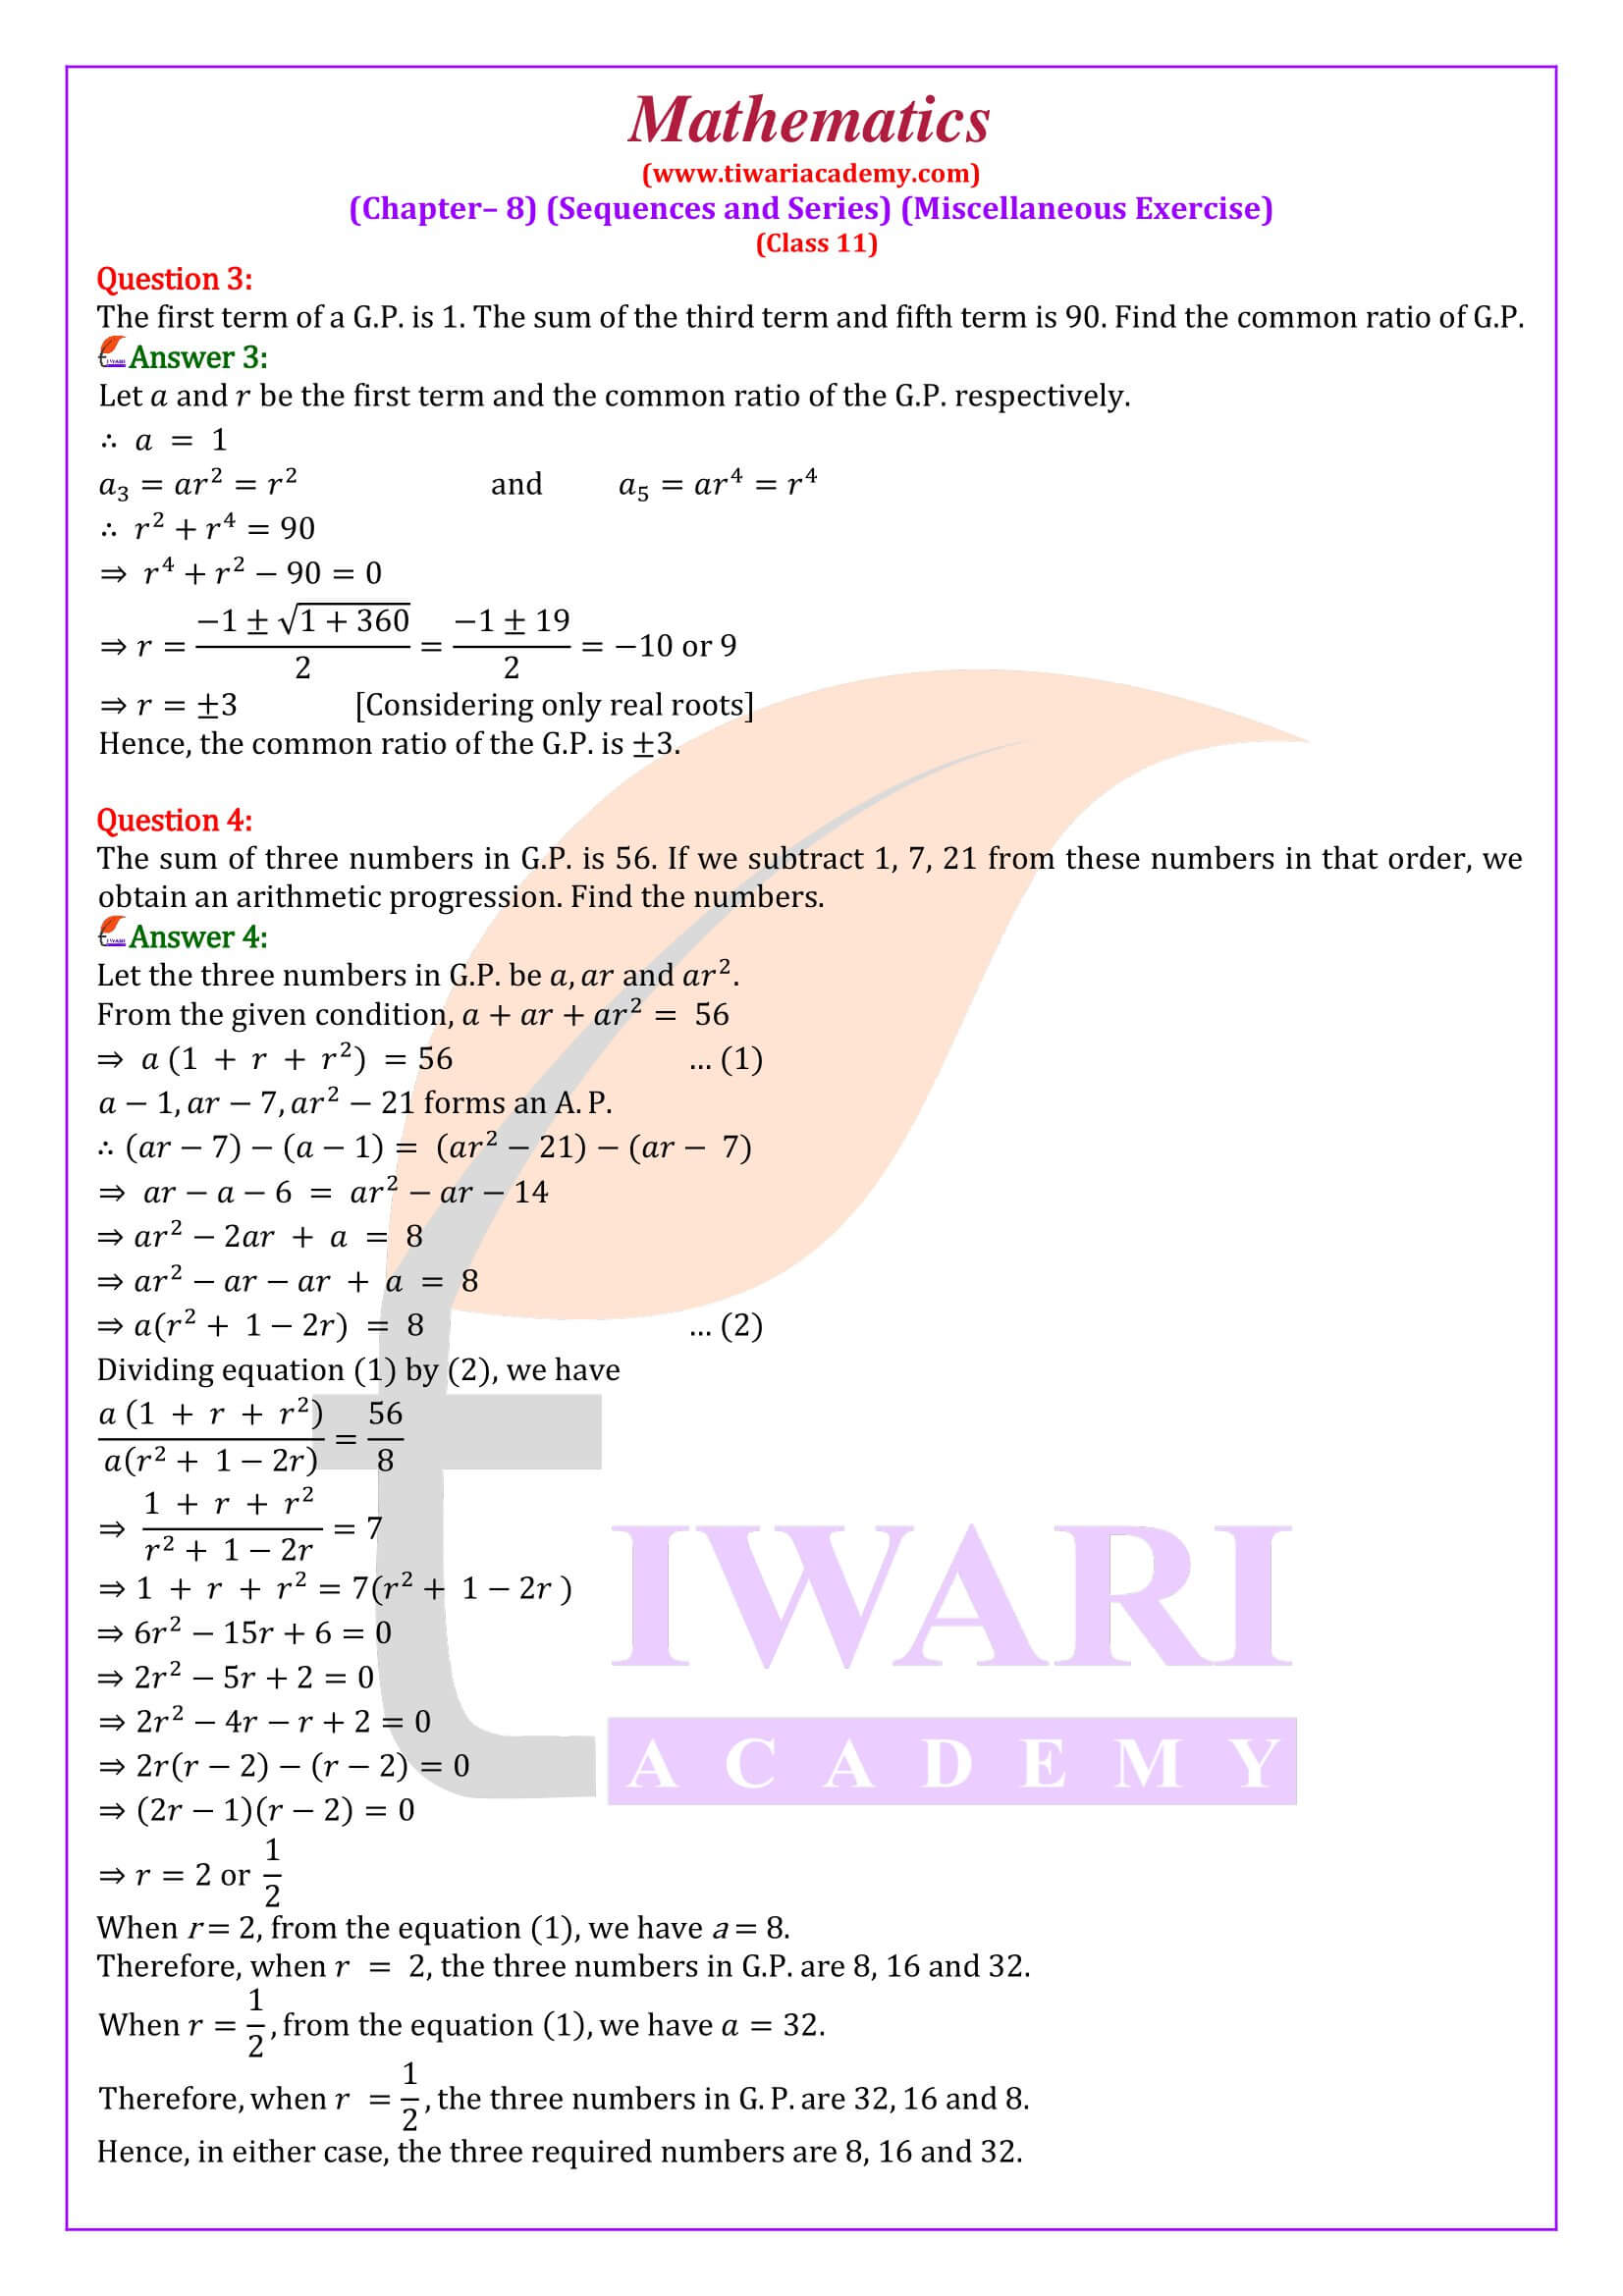 NCERT Solutions Class 11 Maths Chapter 8 Miscellaneous Exercise revised and updated